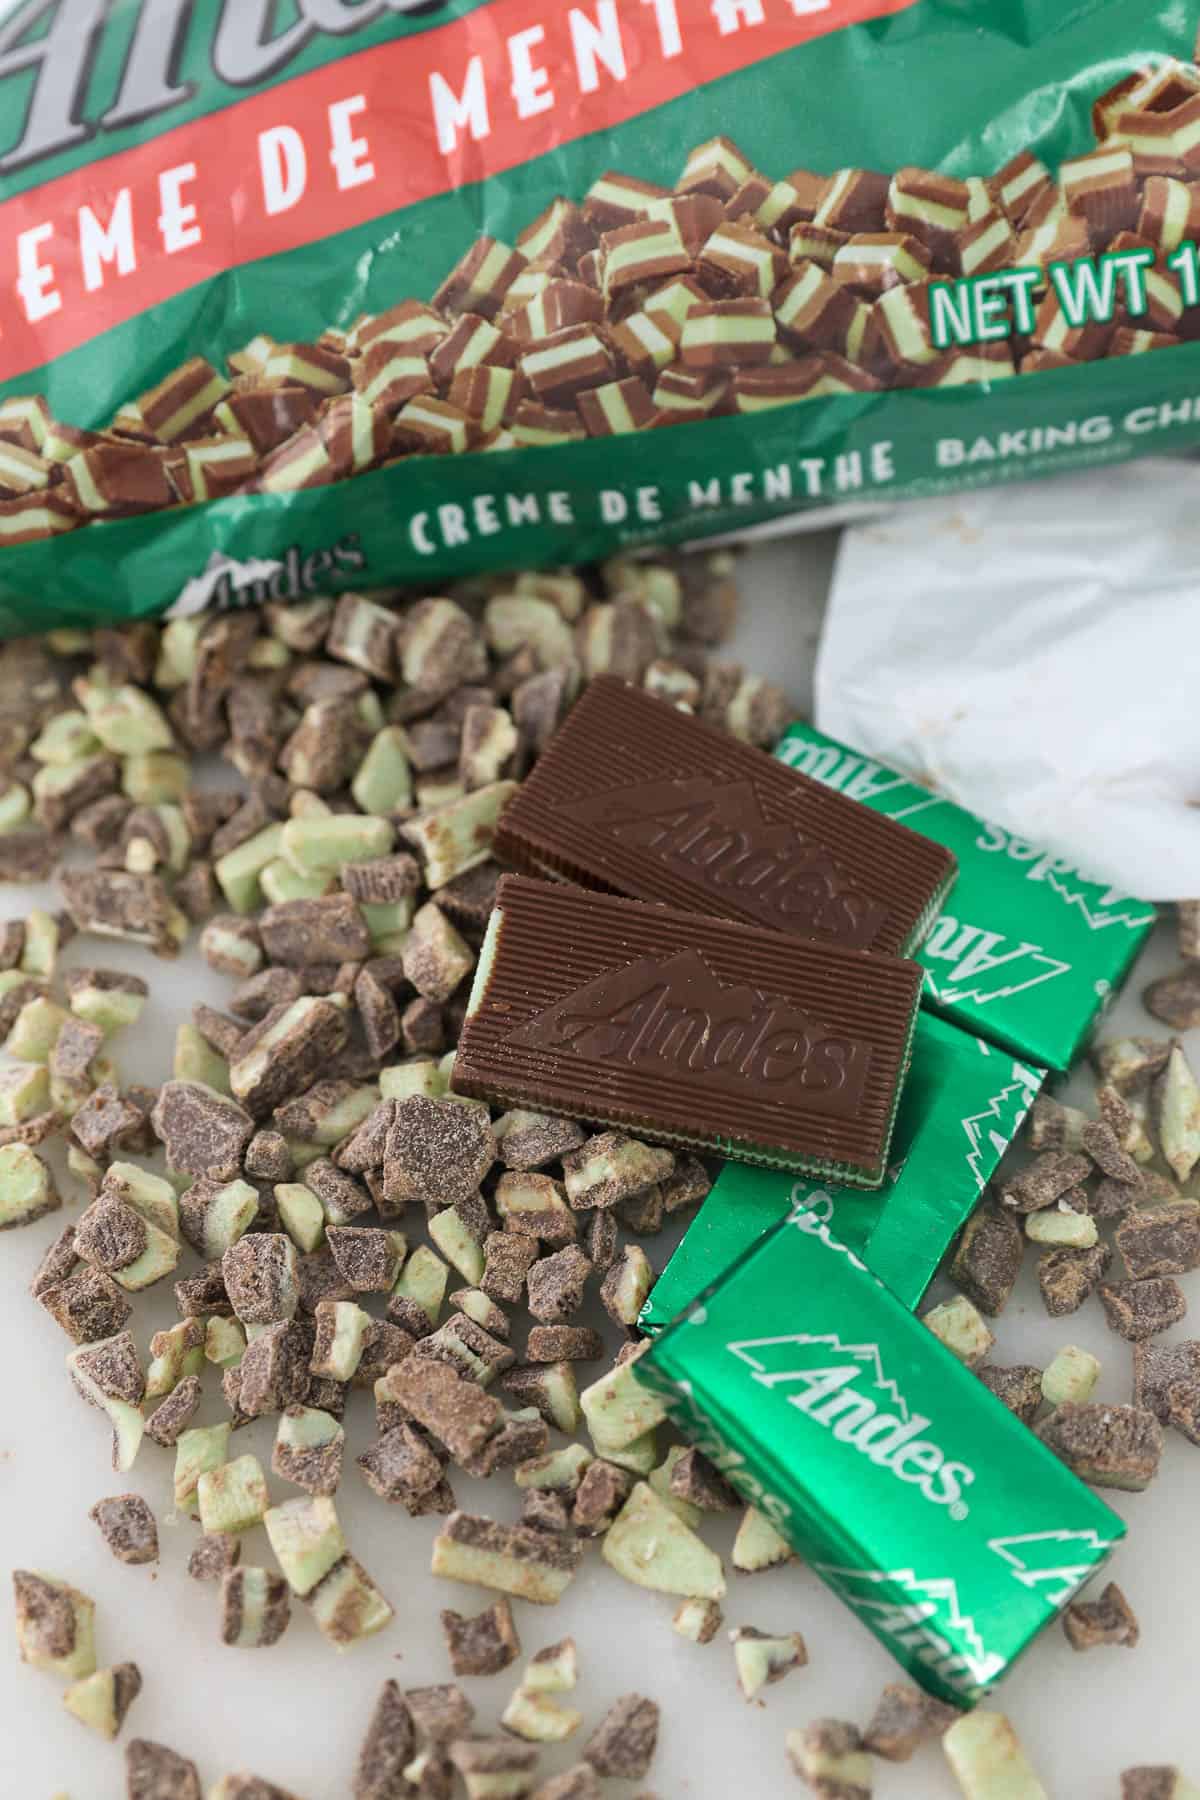 Wrapped and unwrapped Andes Mints scattered on top of chopped Andes Mint candies.